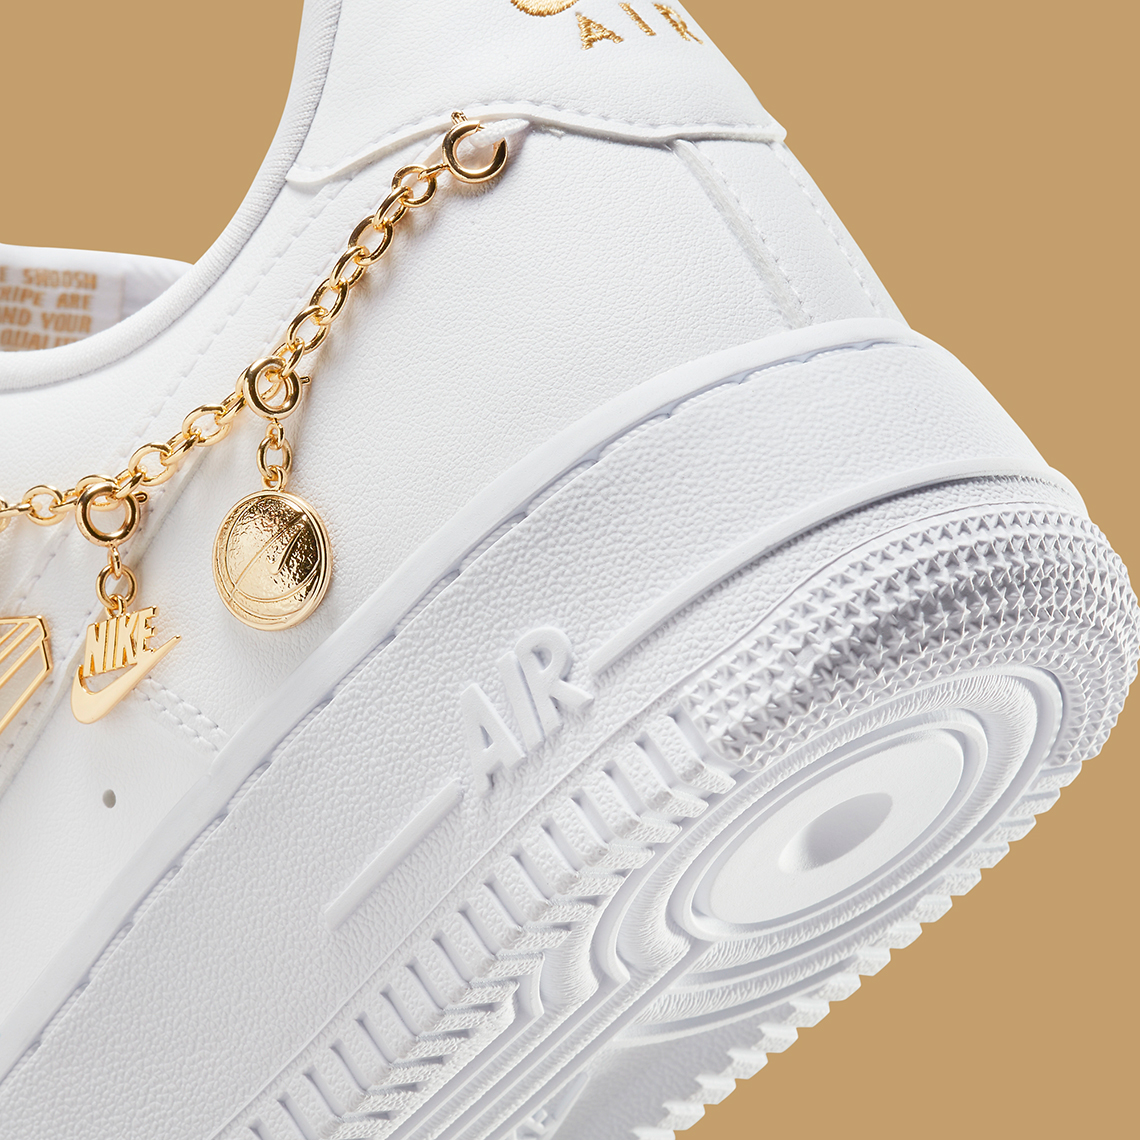 Nike Air Force 1 Low White Metallic Gold Gold Charms Dd1525 100 3